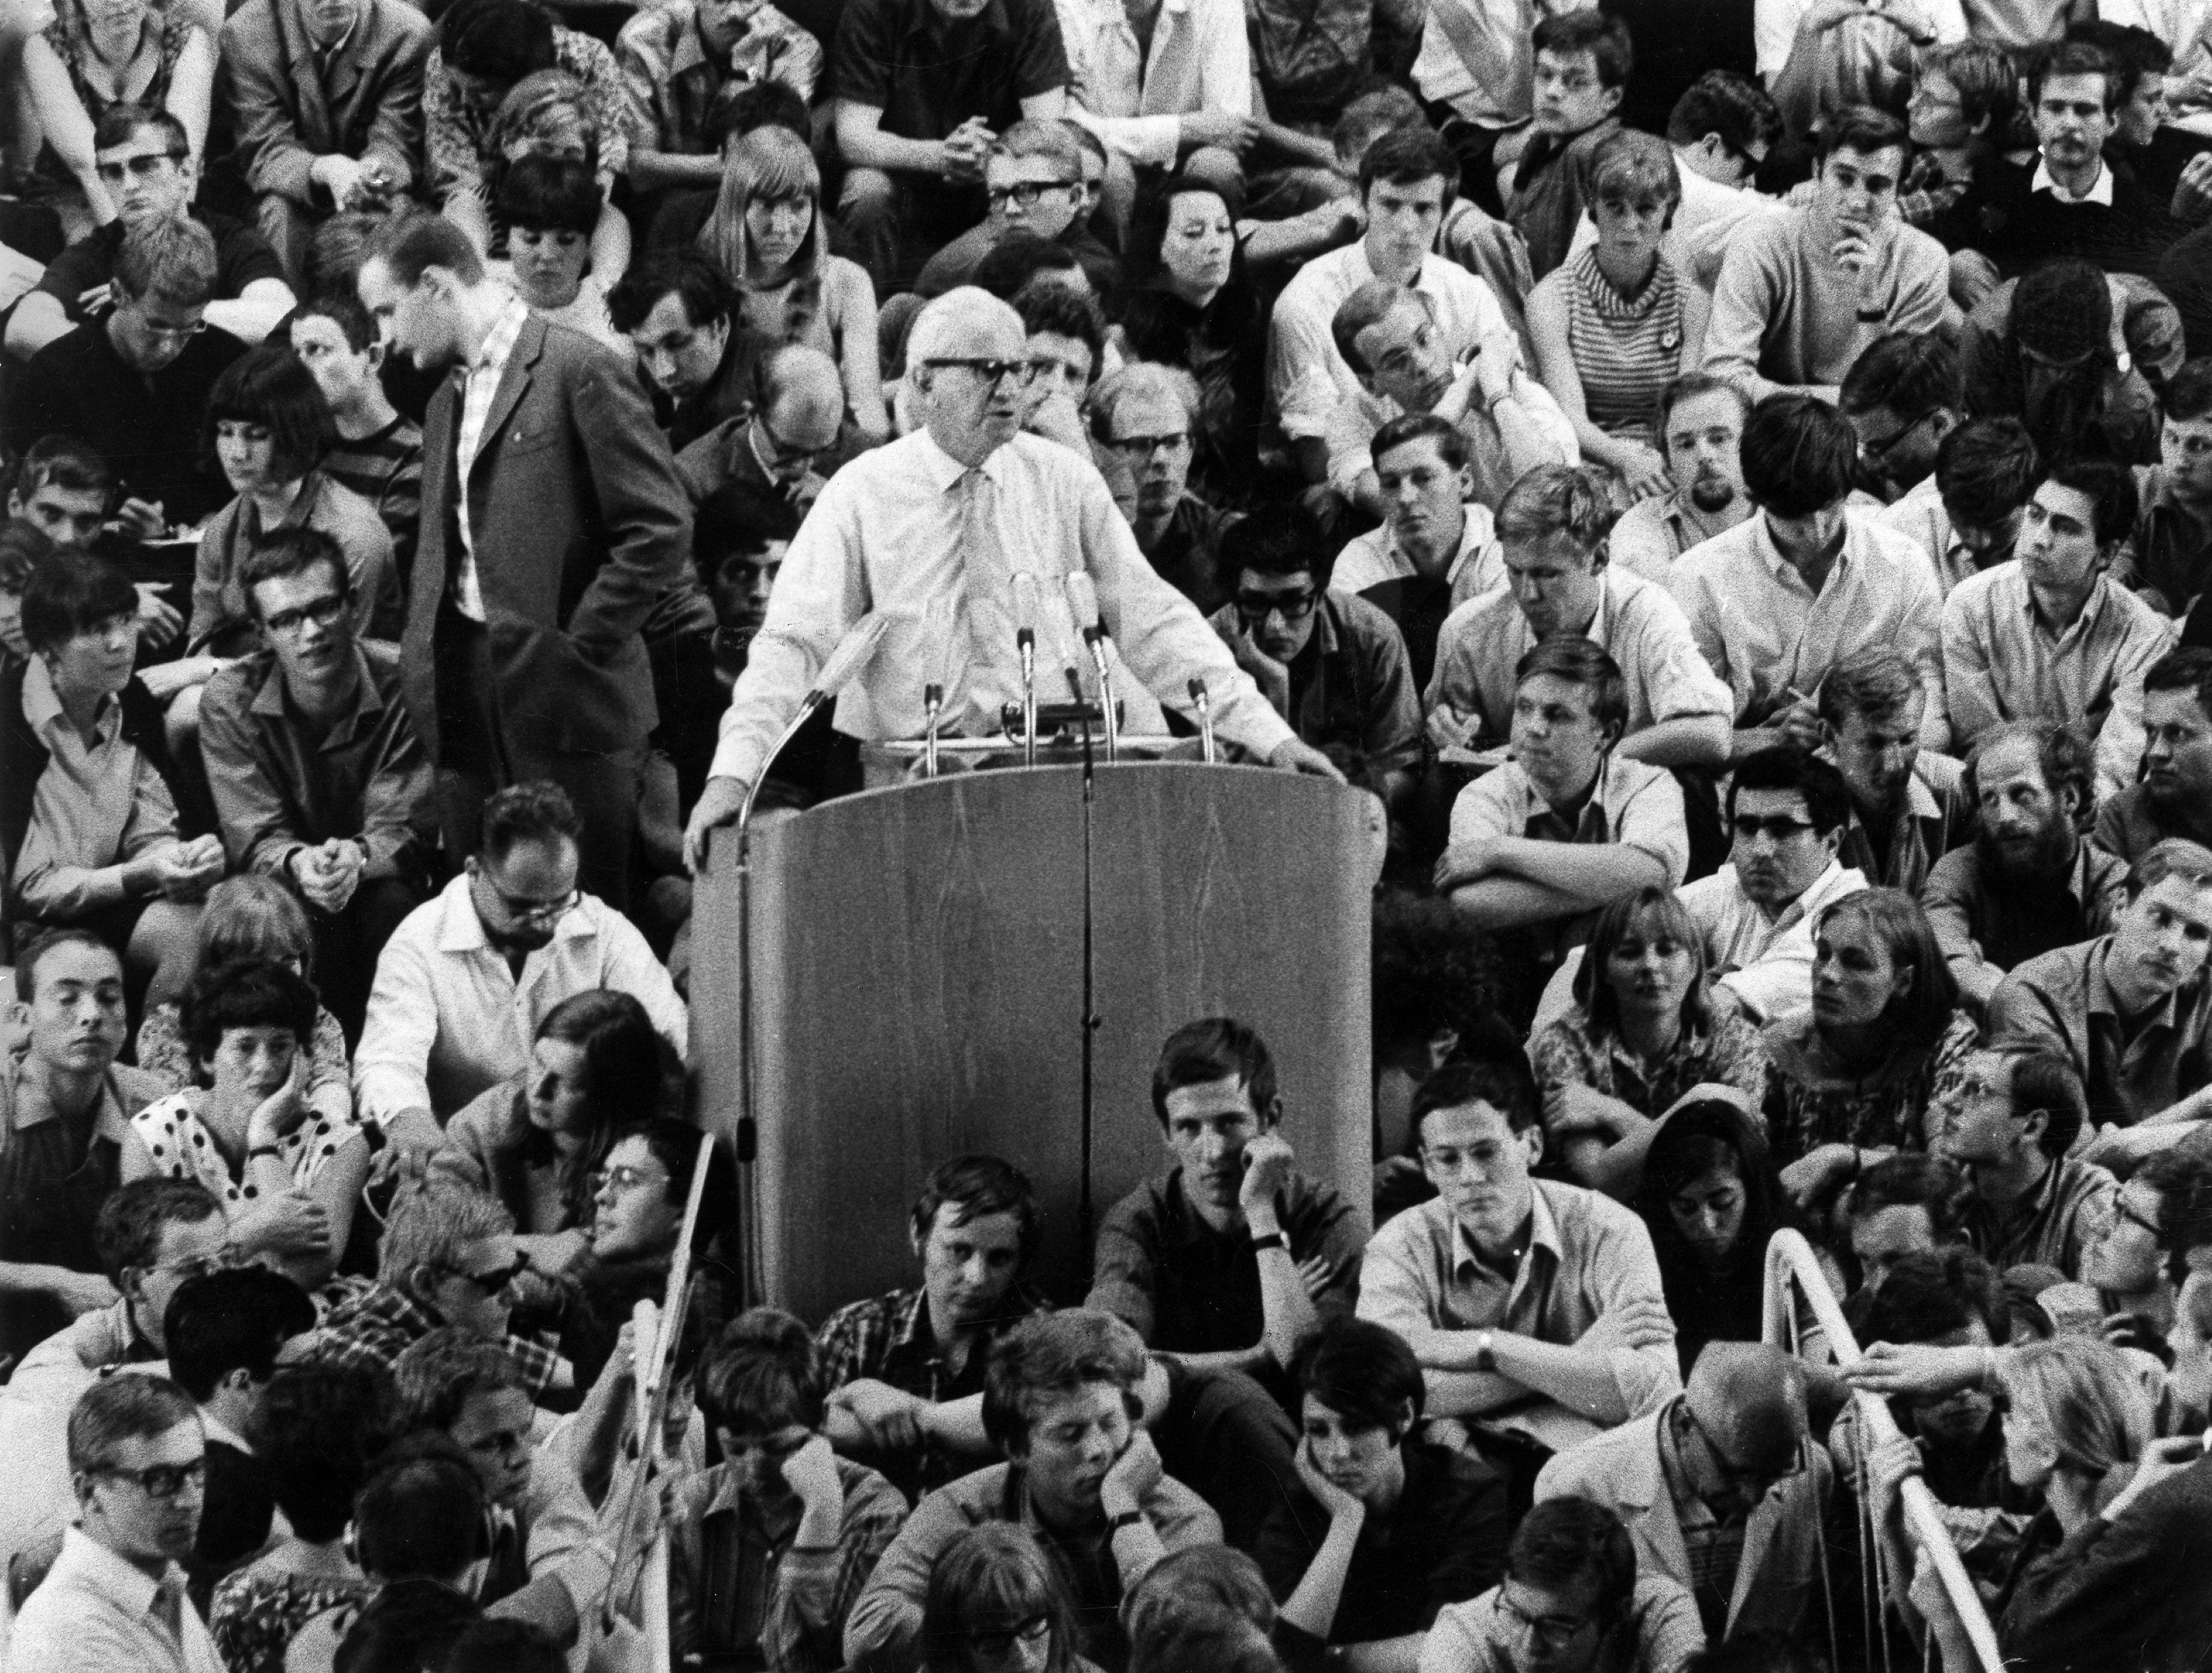 Herbert Marcuse *1898-1979+ American philosopher and sociologist behind a lectern at an event at the Freie Universität Berlin (FU) - 1967